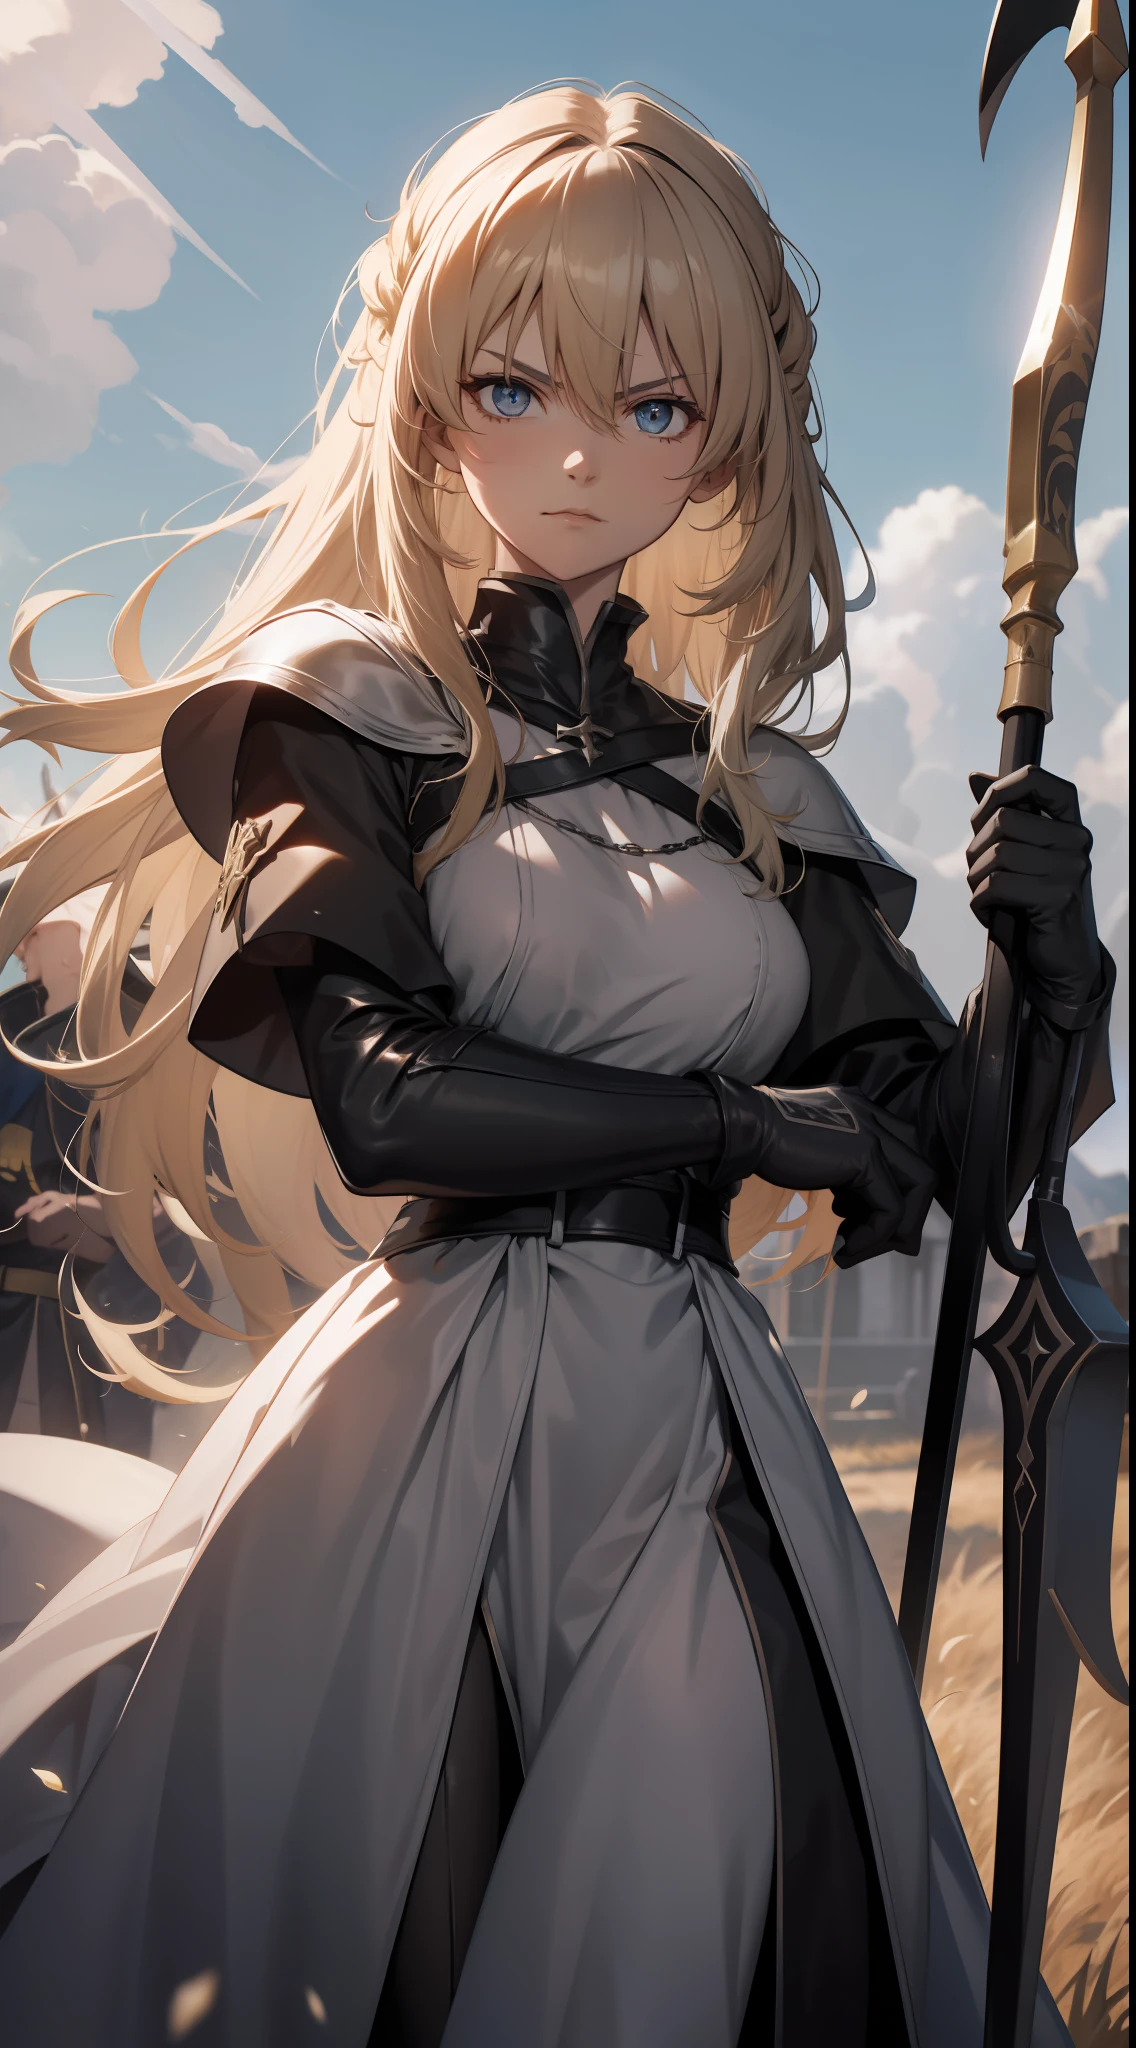 Jeanne D'arc Alter, fate, Joan of Arc Alt holds a black sword in her hand，Raise up on the battlefield, 8K, japanese anime style high resolution, Perfect hand, Perfect eye, A detailed eye, The detailed hand, Armor, Raise Hand, Screaming, Angry expression, 2D illustration , Blonde hair, midday sunlight, disrupt, medieval battle in the background